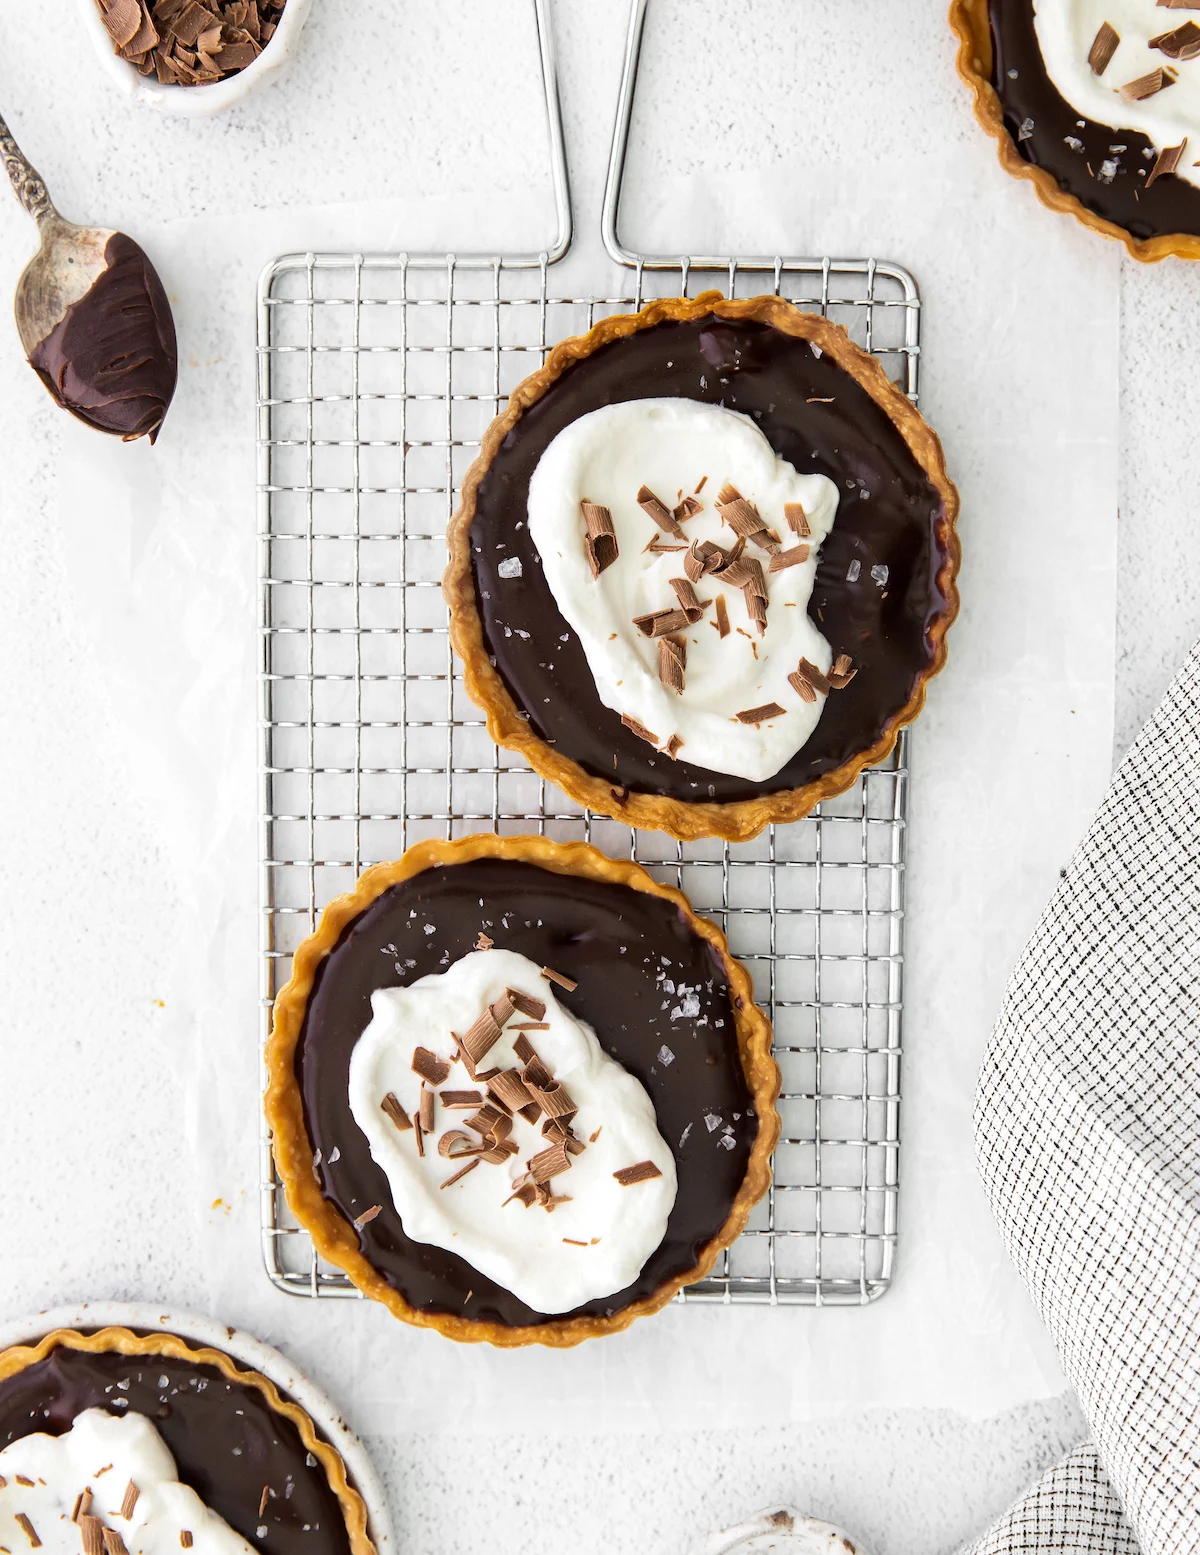 Tarts with whipped cream added and chocolate shavings